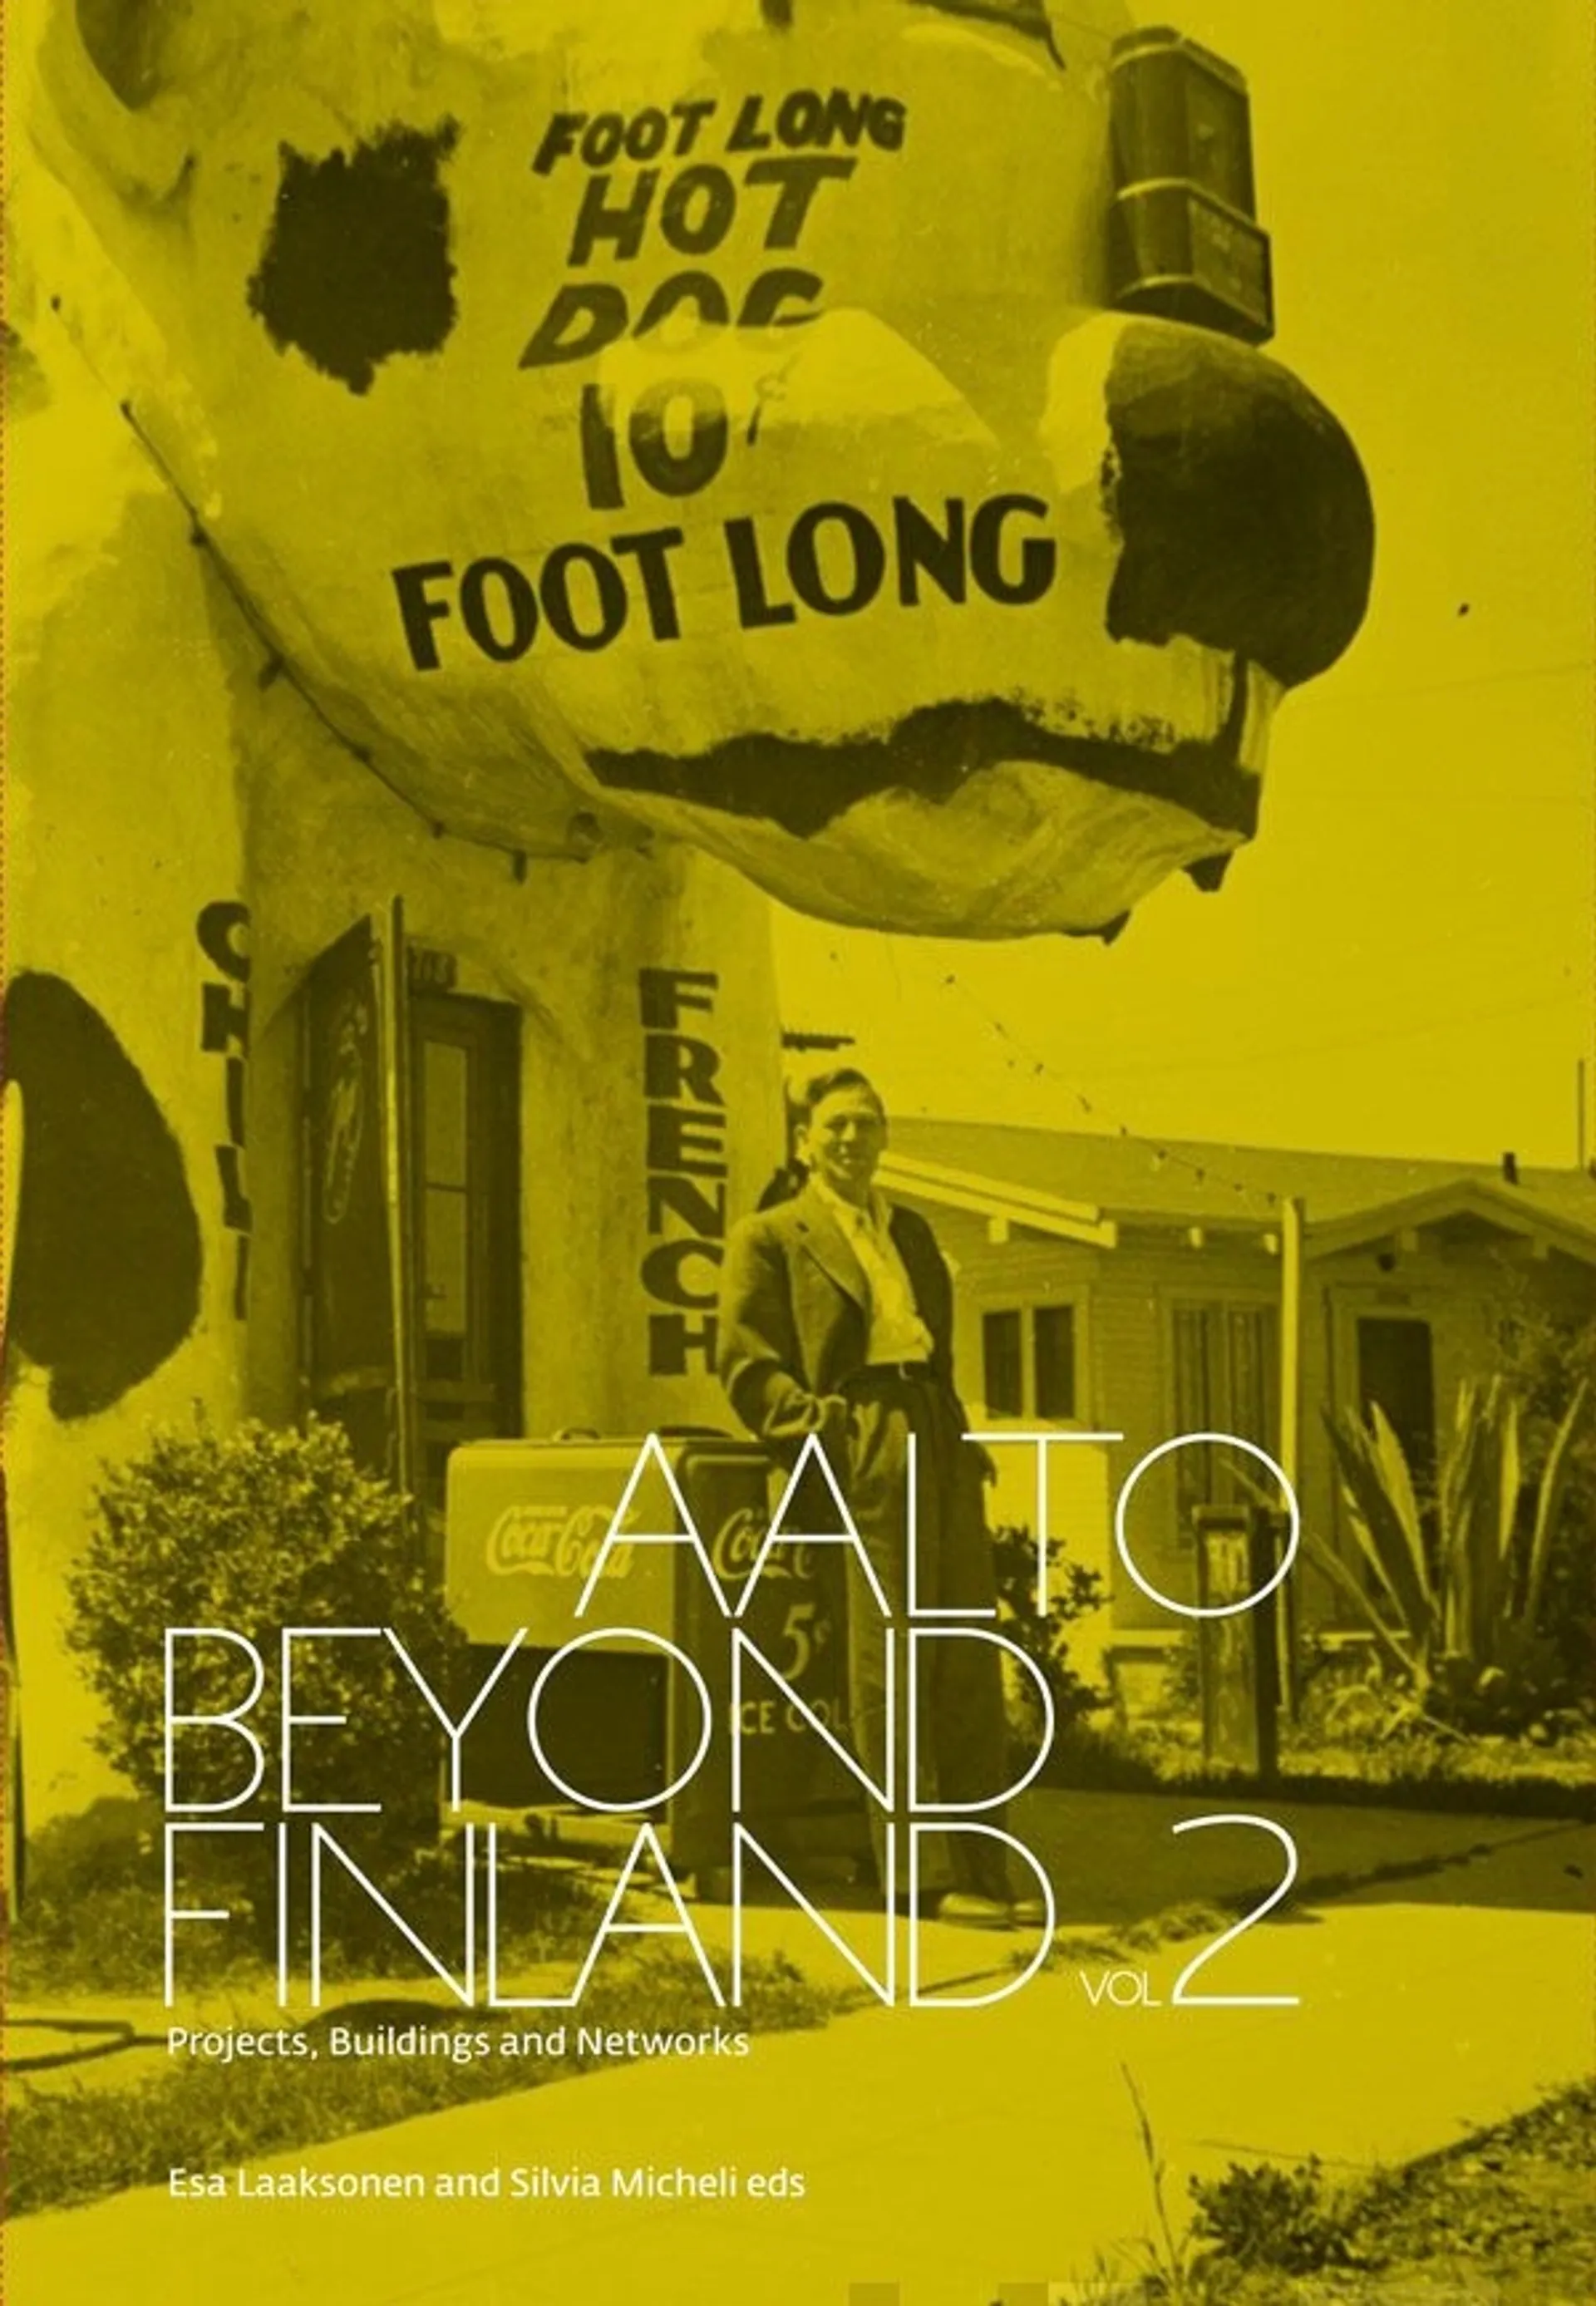 Aalto beyond Finland vol 2 - Projects, Buildings, Network